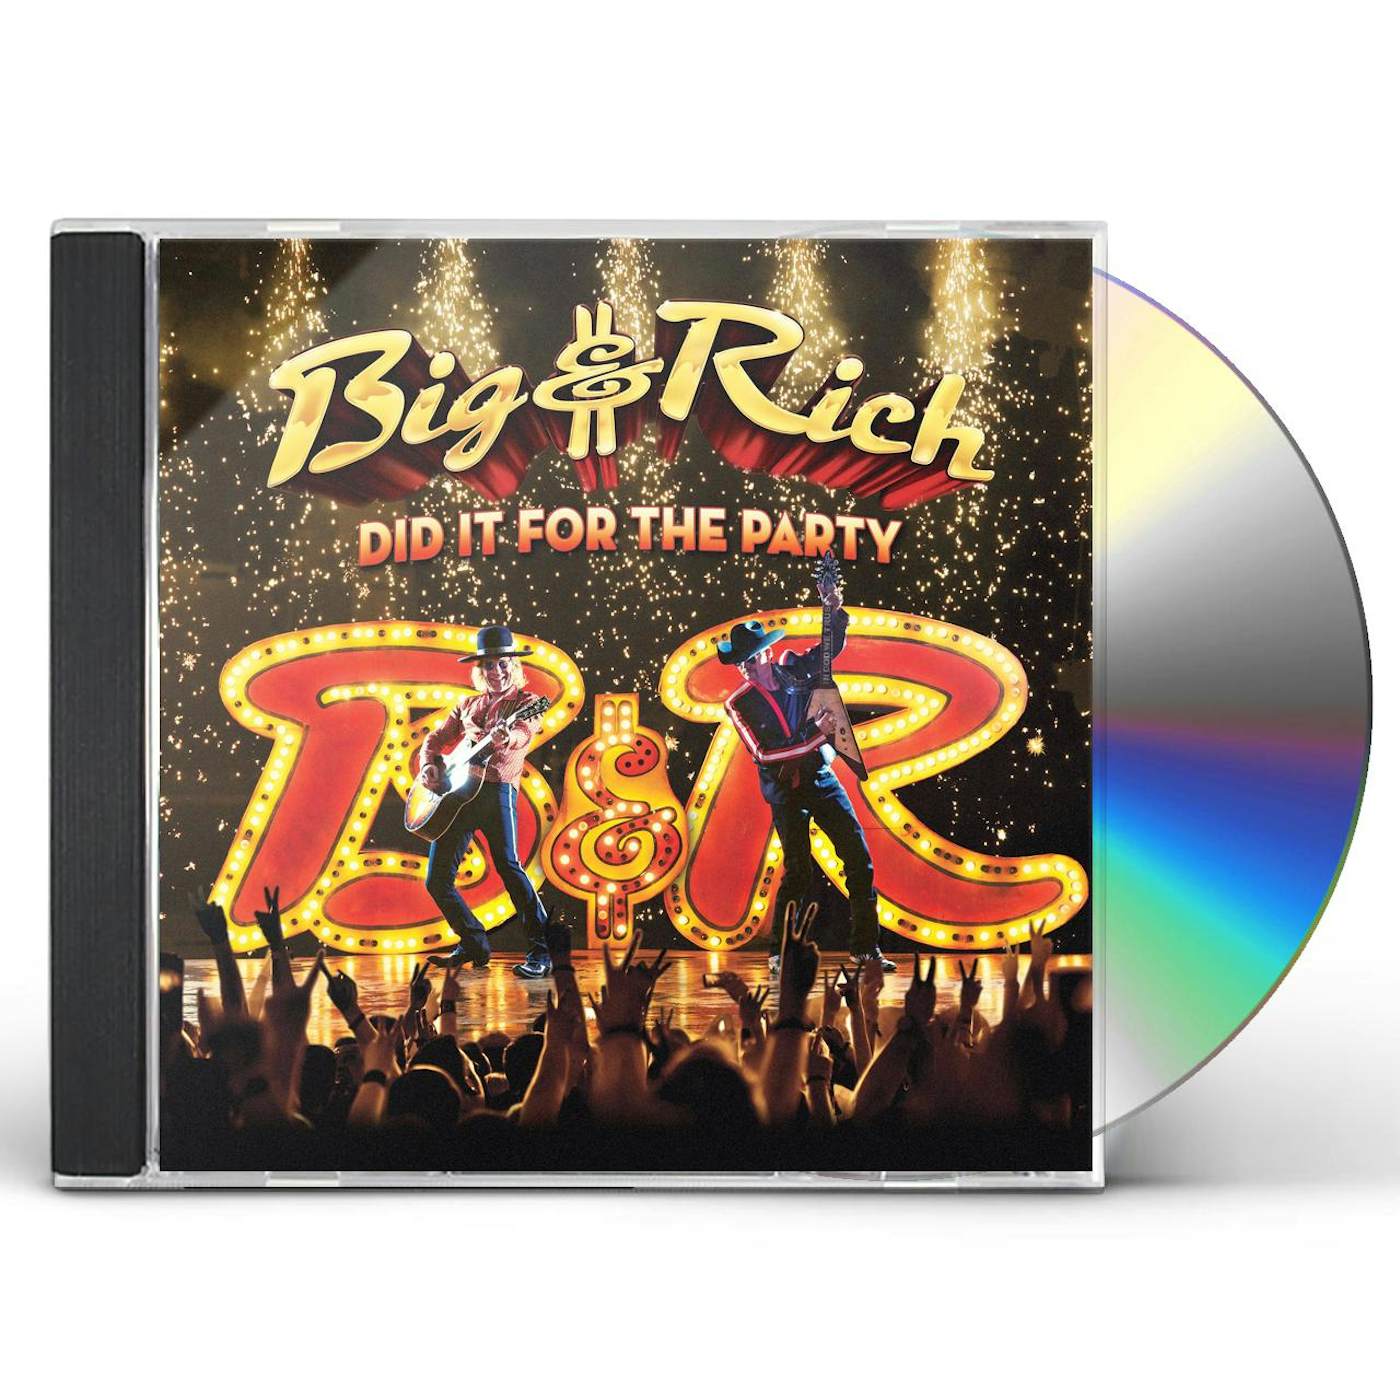 Big & Rich DID IT FOR THE PARTY CD